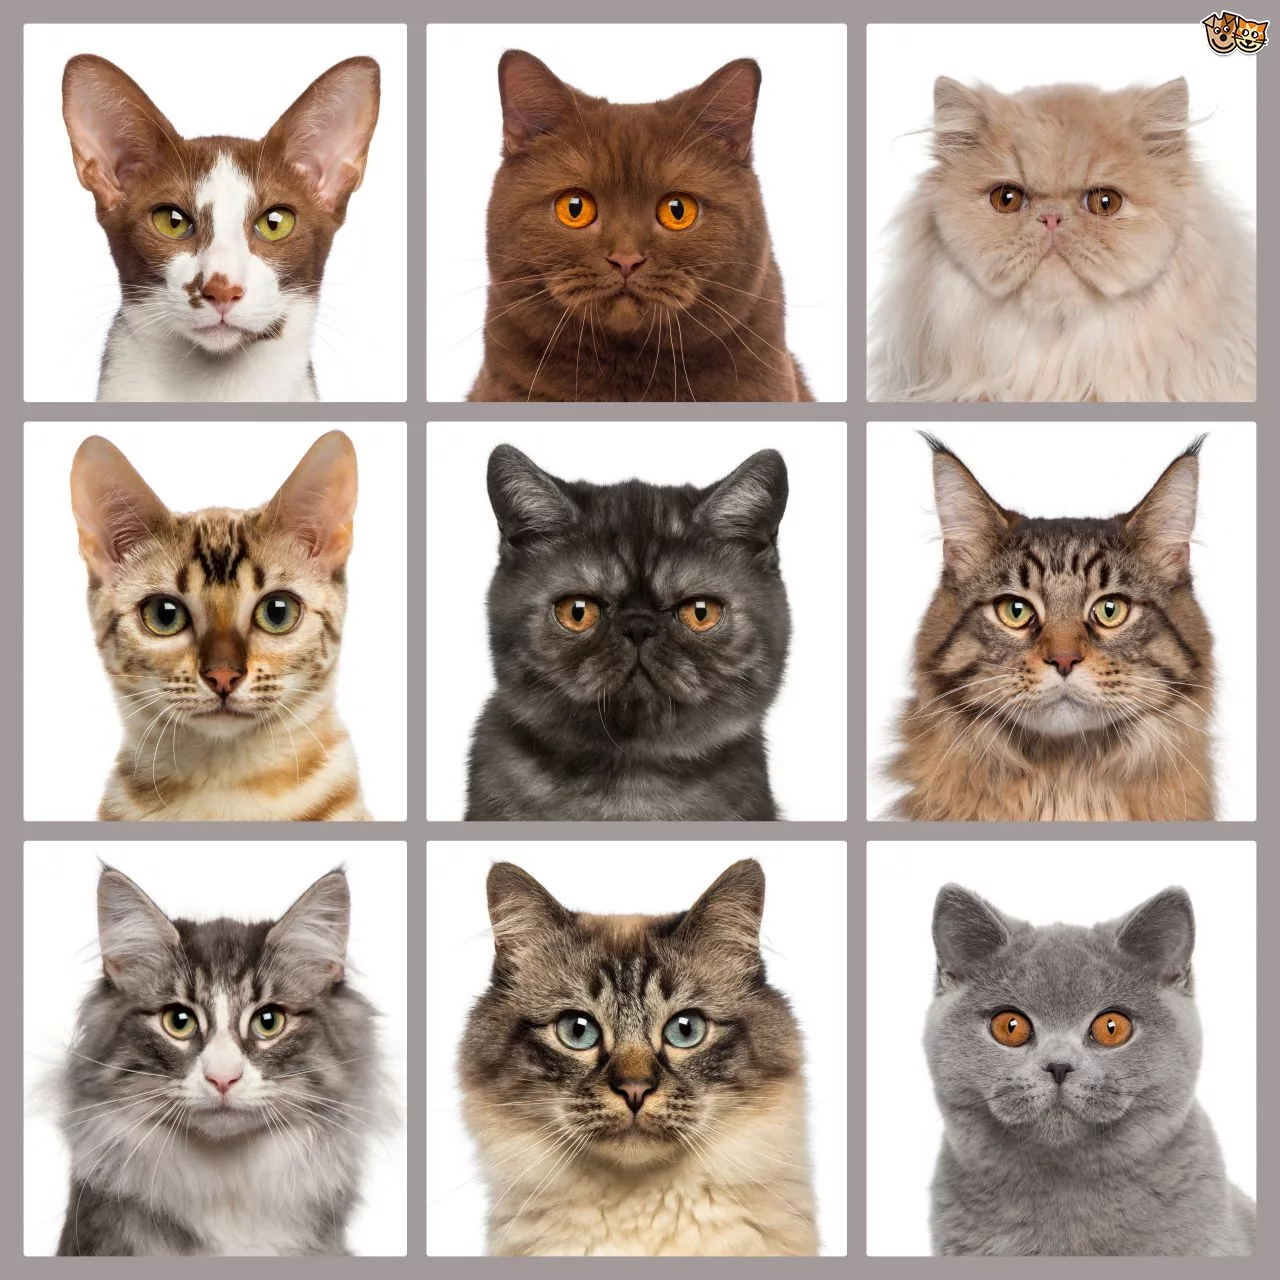 Choosing Your Cat’s Breed